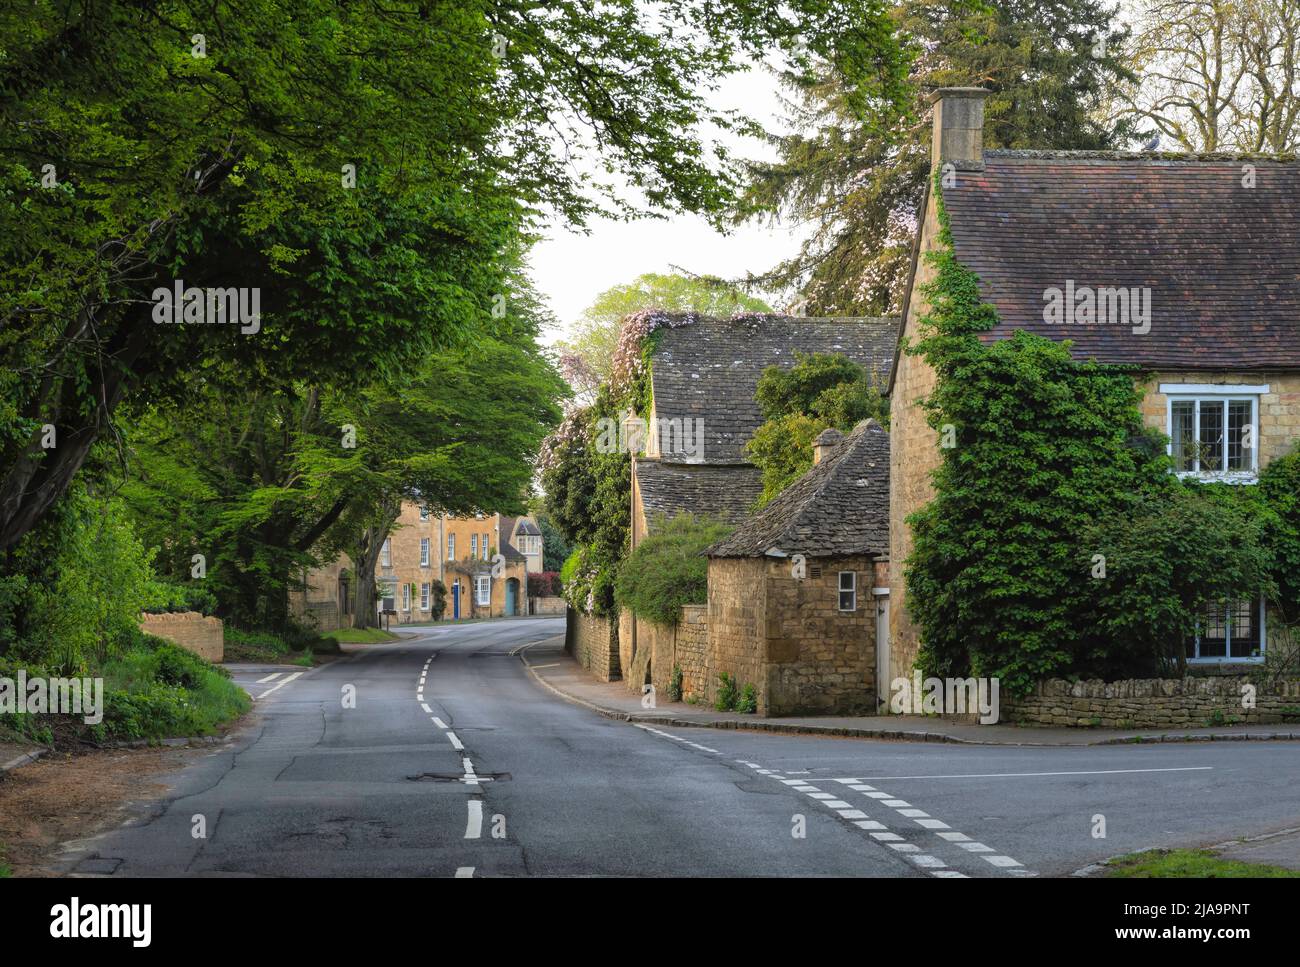 Hübsche Cotswold Cottages in Chipping Campden, Gloucestershire, England. Stockfoto